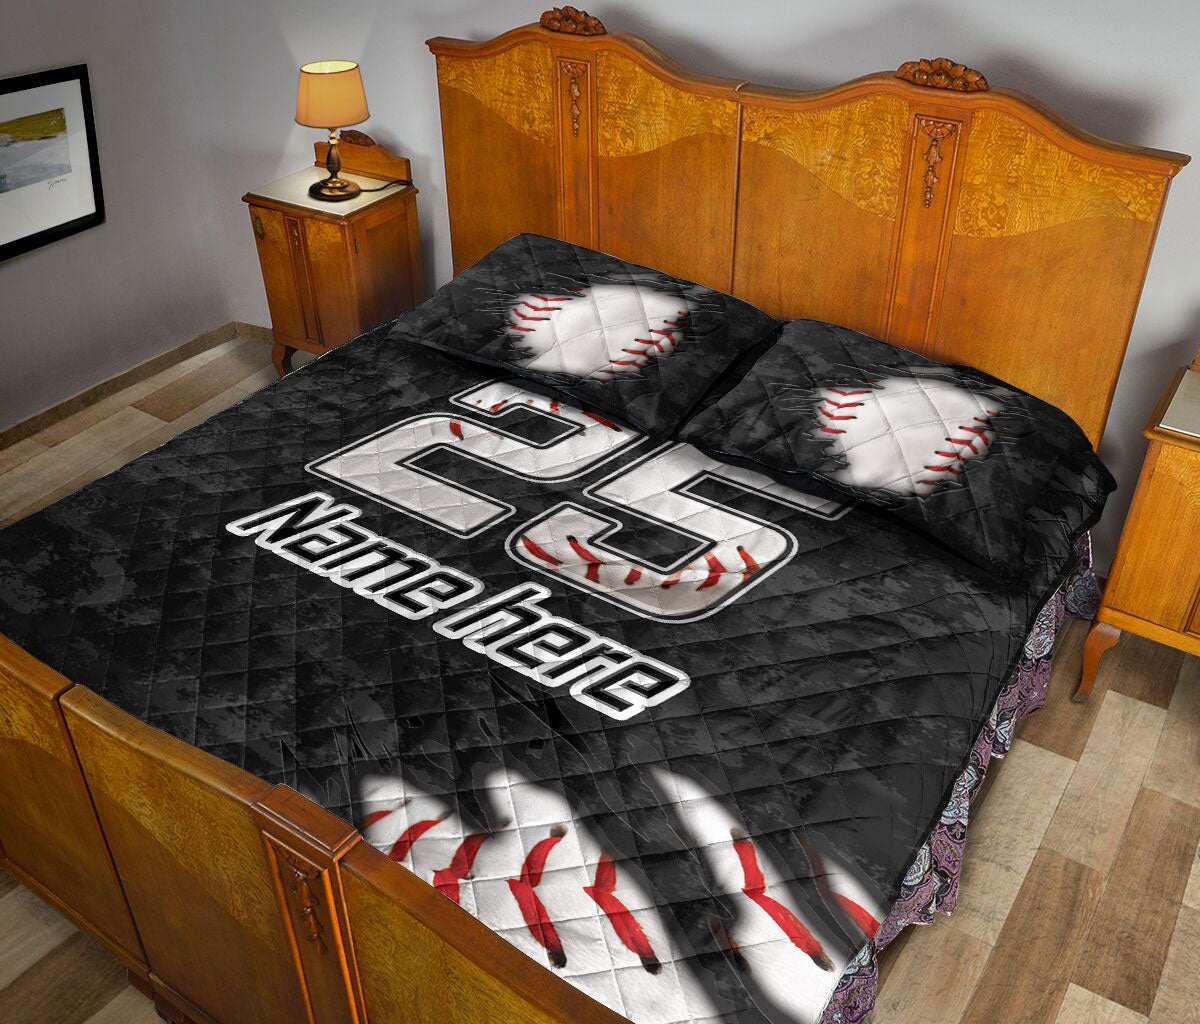 Ohaprints-Quilt-Bed-Set-Pillowcase-Baseball-Sport-White-Ball-Pattern-Black-Camo-Custom-Personalized-Name-Number-Blanket-Bedspread-Bedding-327-Queen (80'' x 90'')